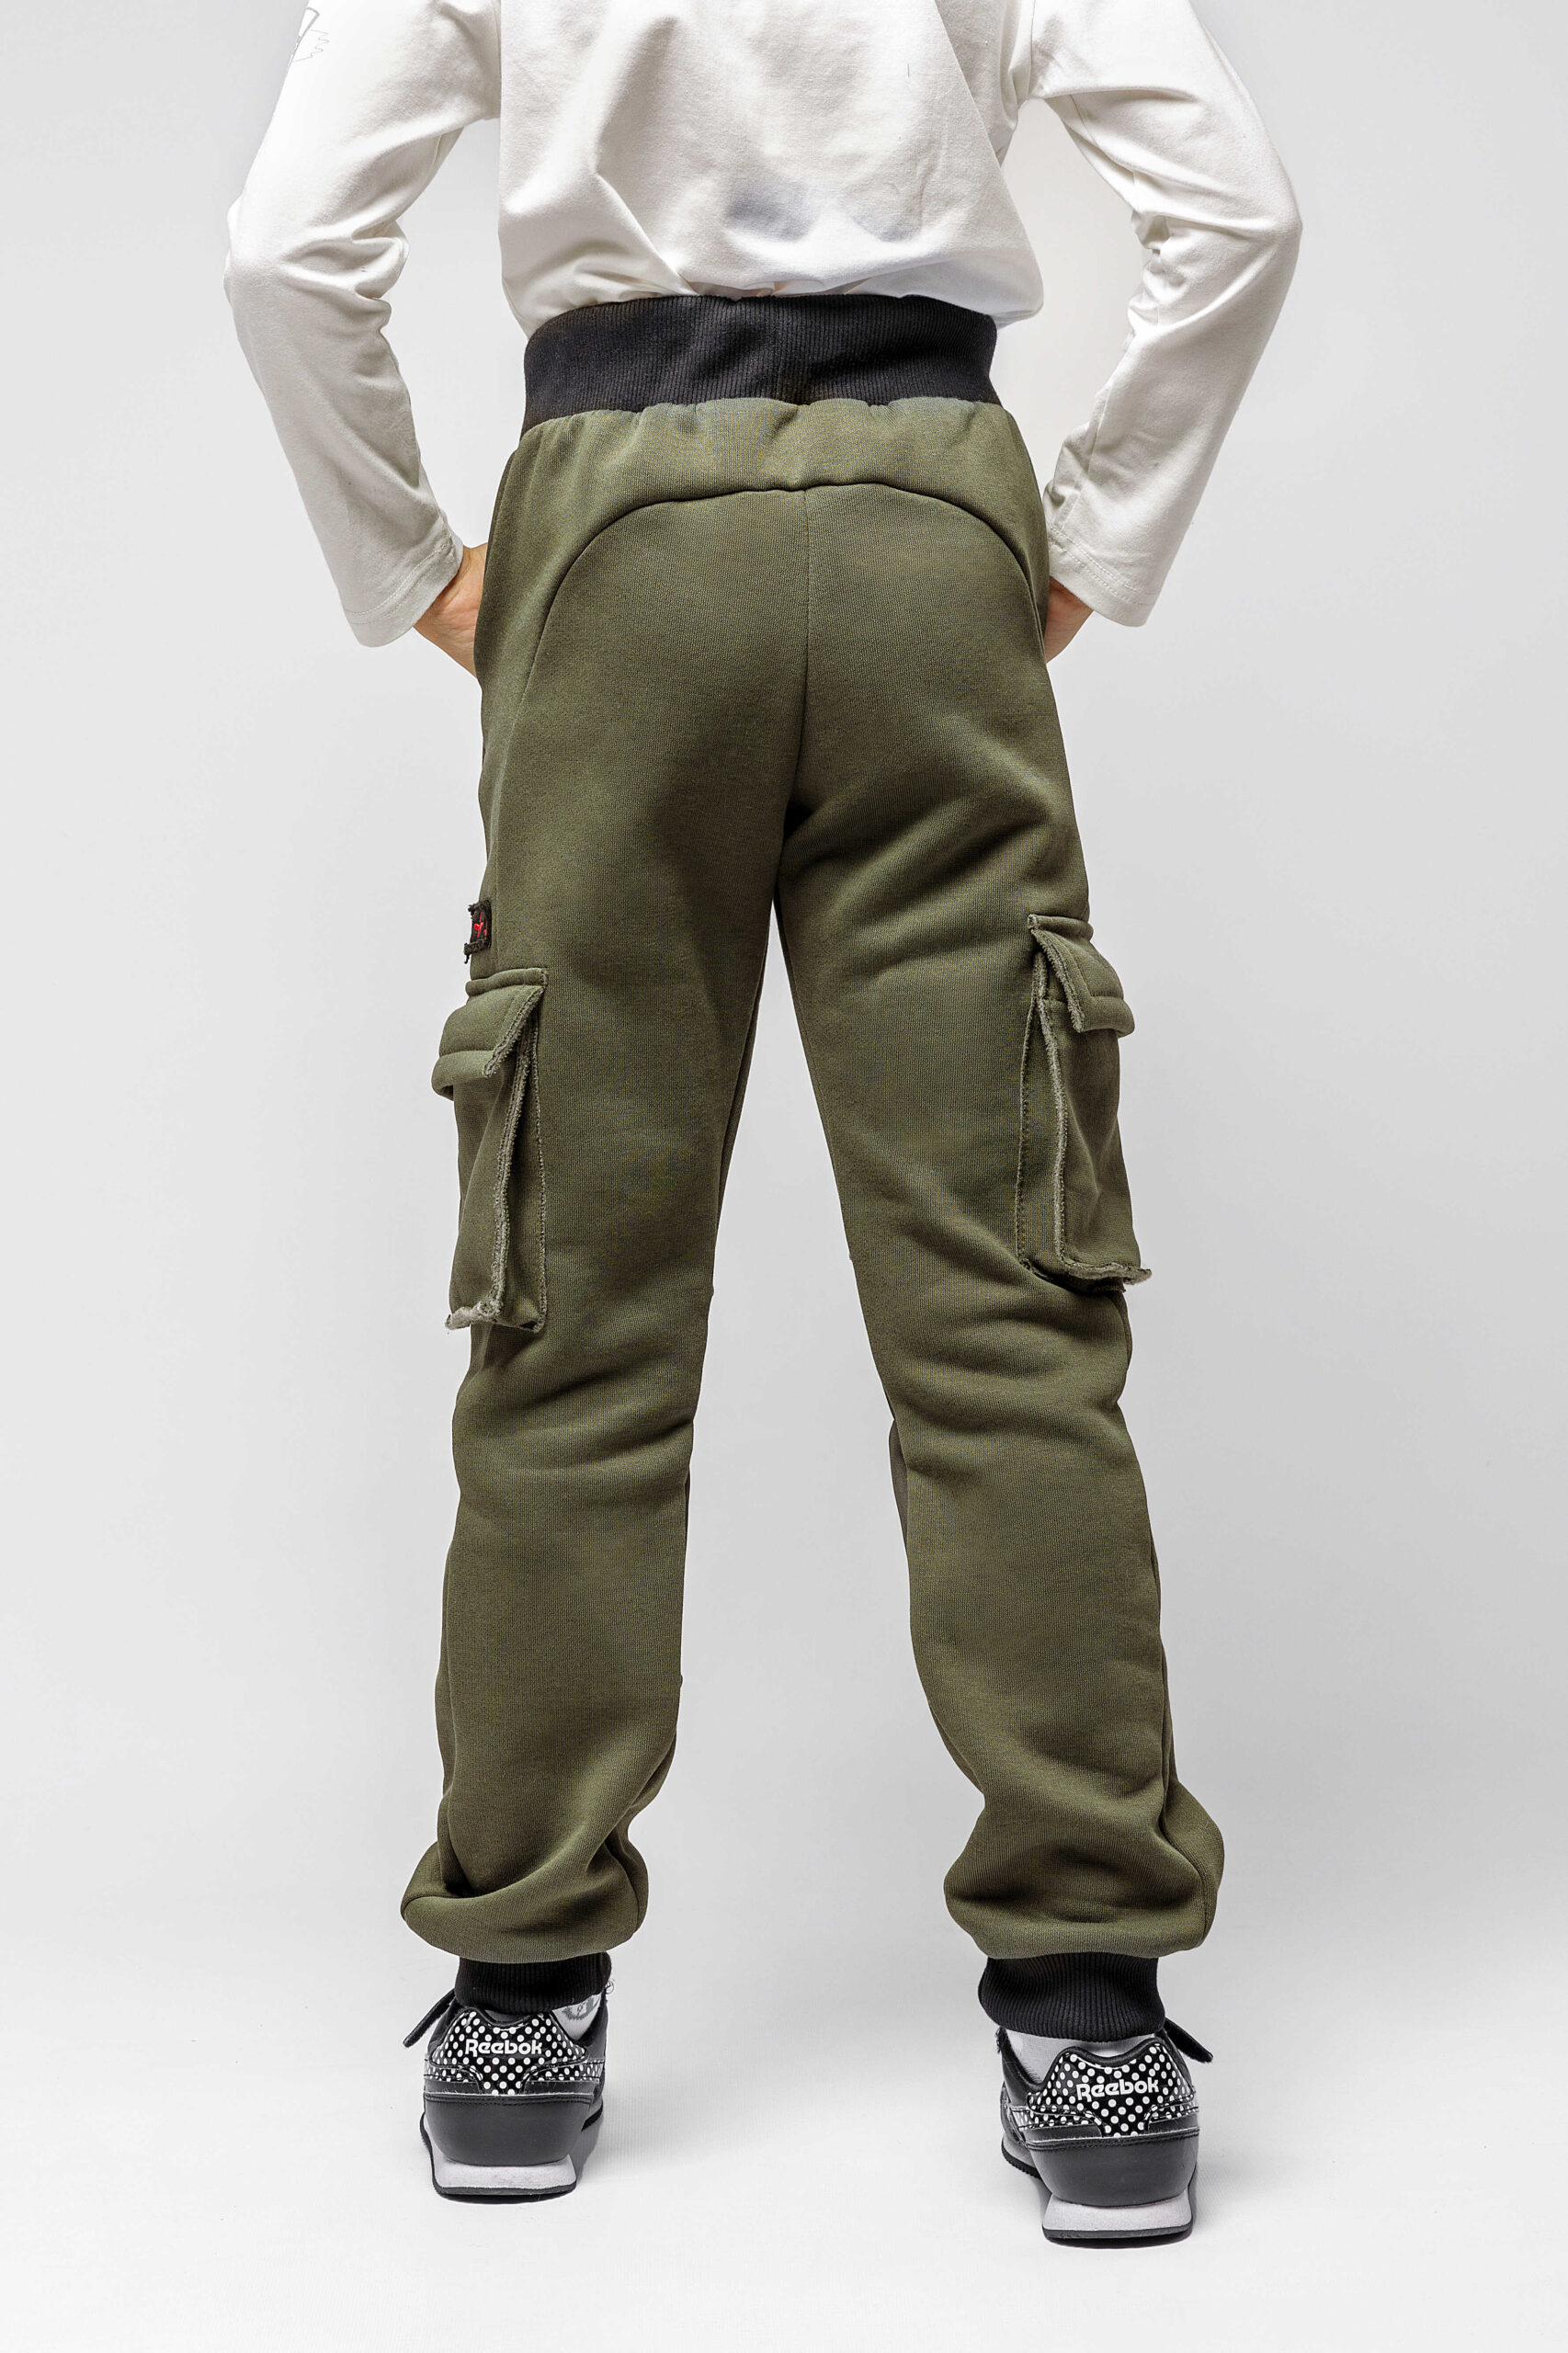 Kids Pants Syla. Color khaki. 
Material of the inserts: oxford cloth, 100% polyester.